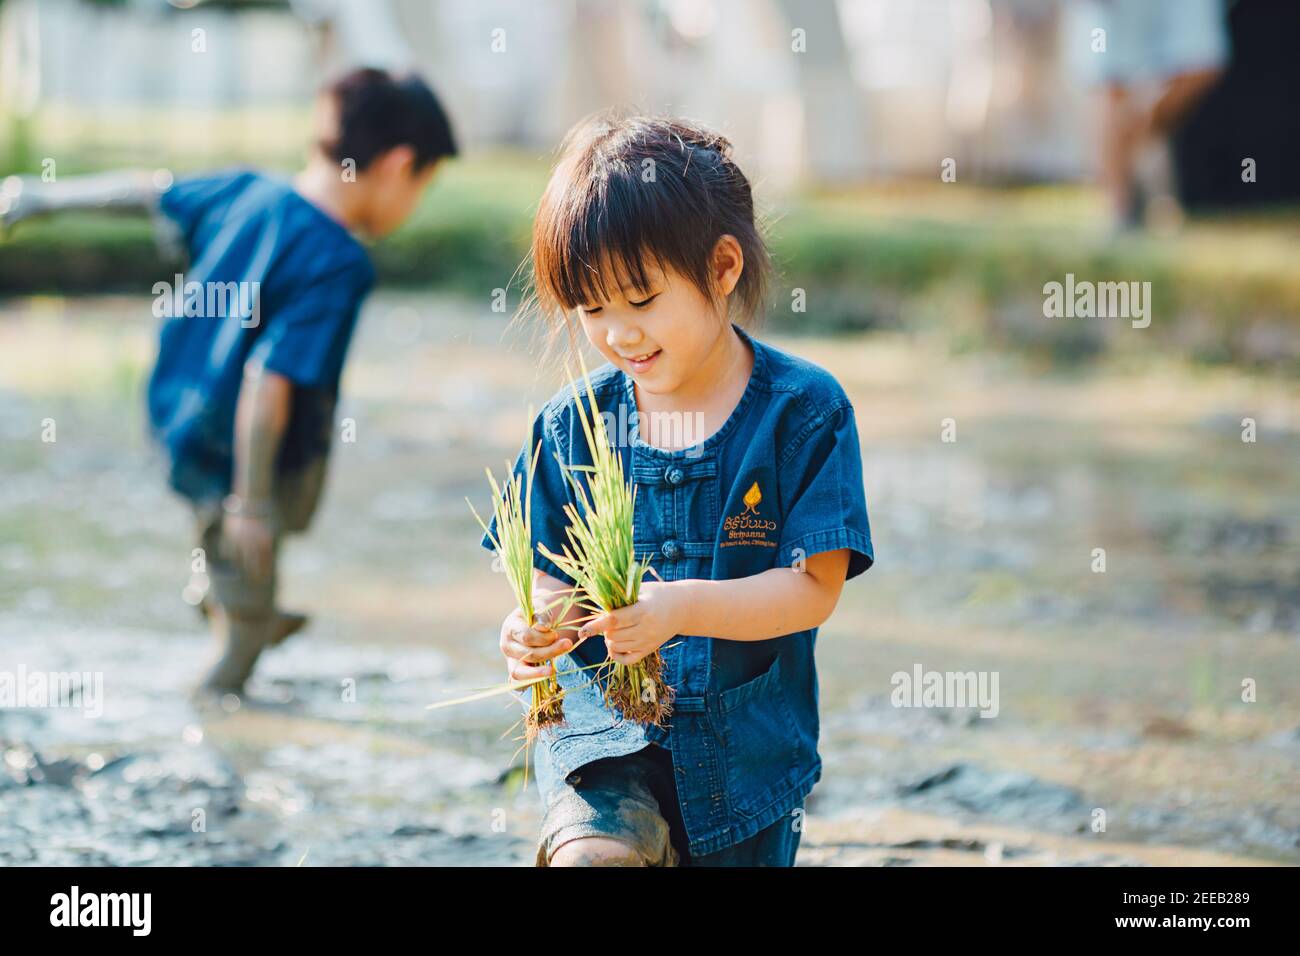 Little children play and exploring in the garden with thier planting sprout. Concept for eco friendly gardening and sustainable living. Stock Photo